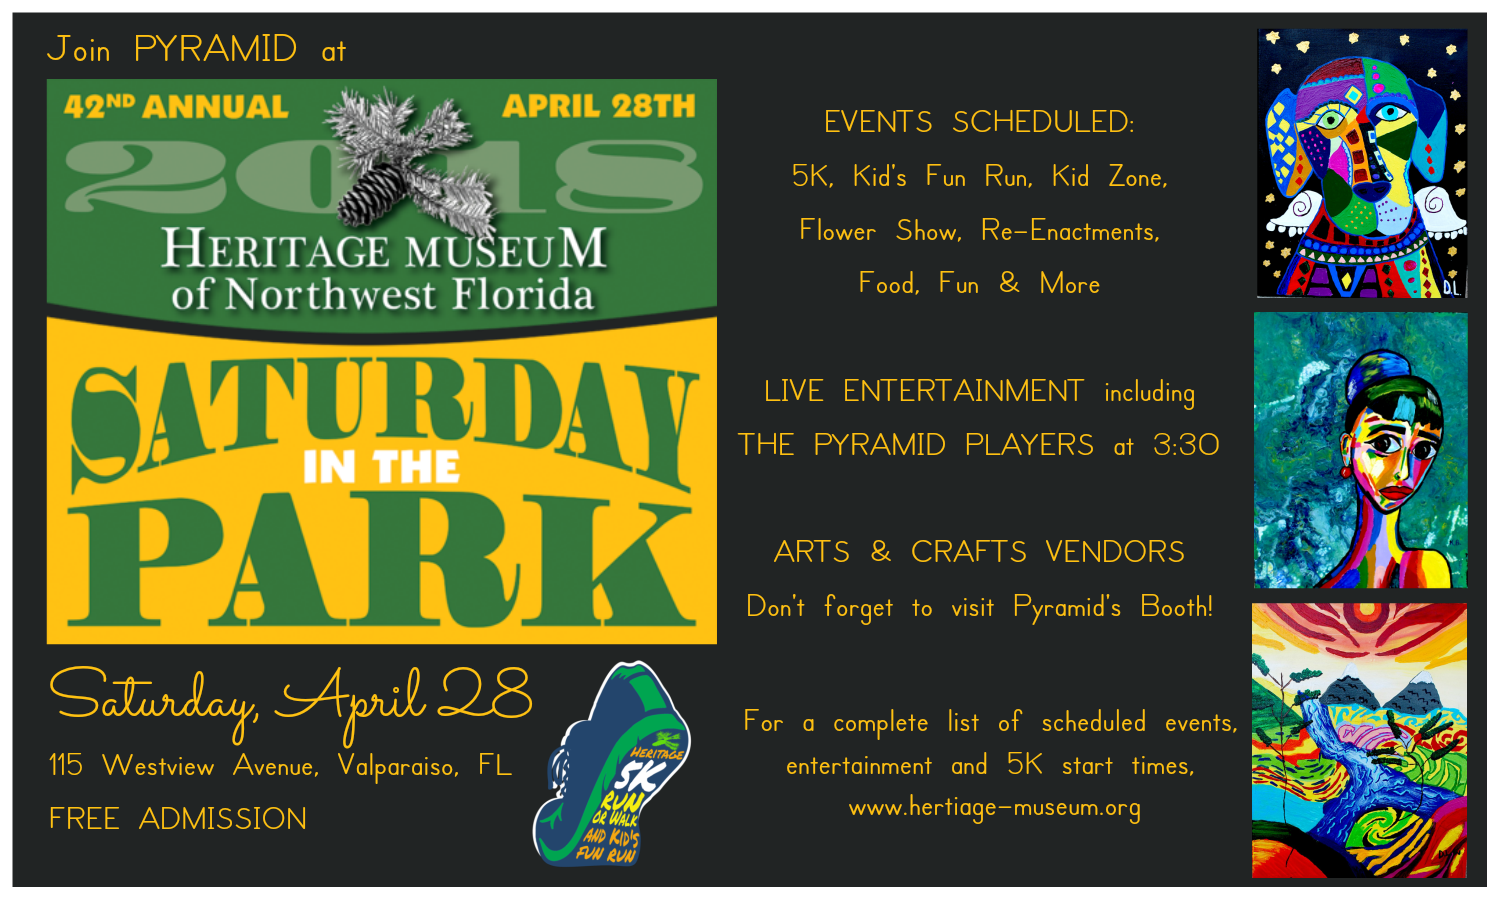 Saturday in the Park event flyer